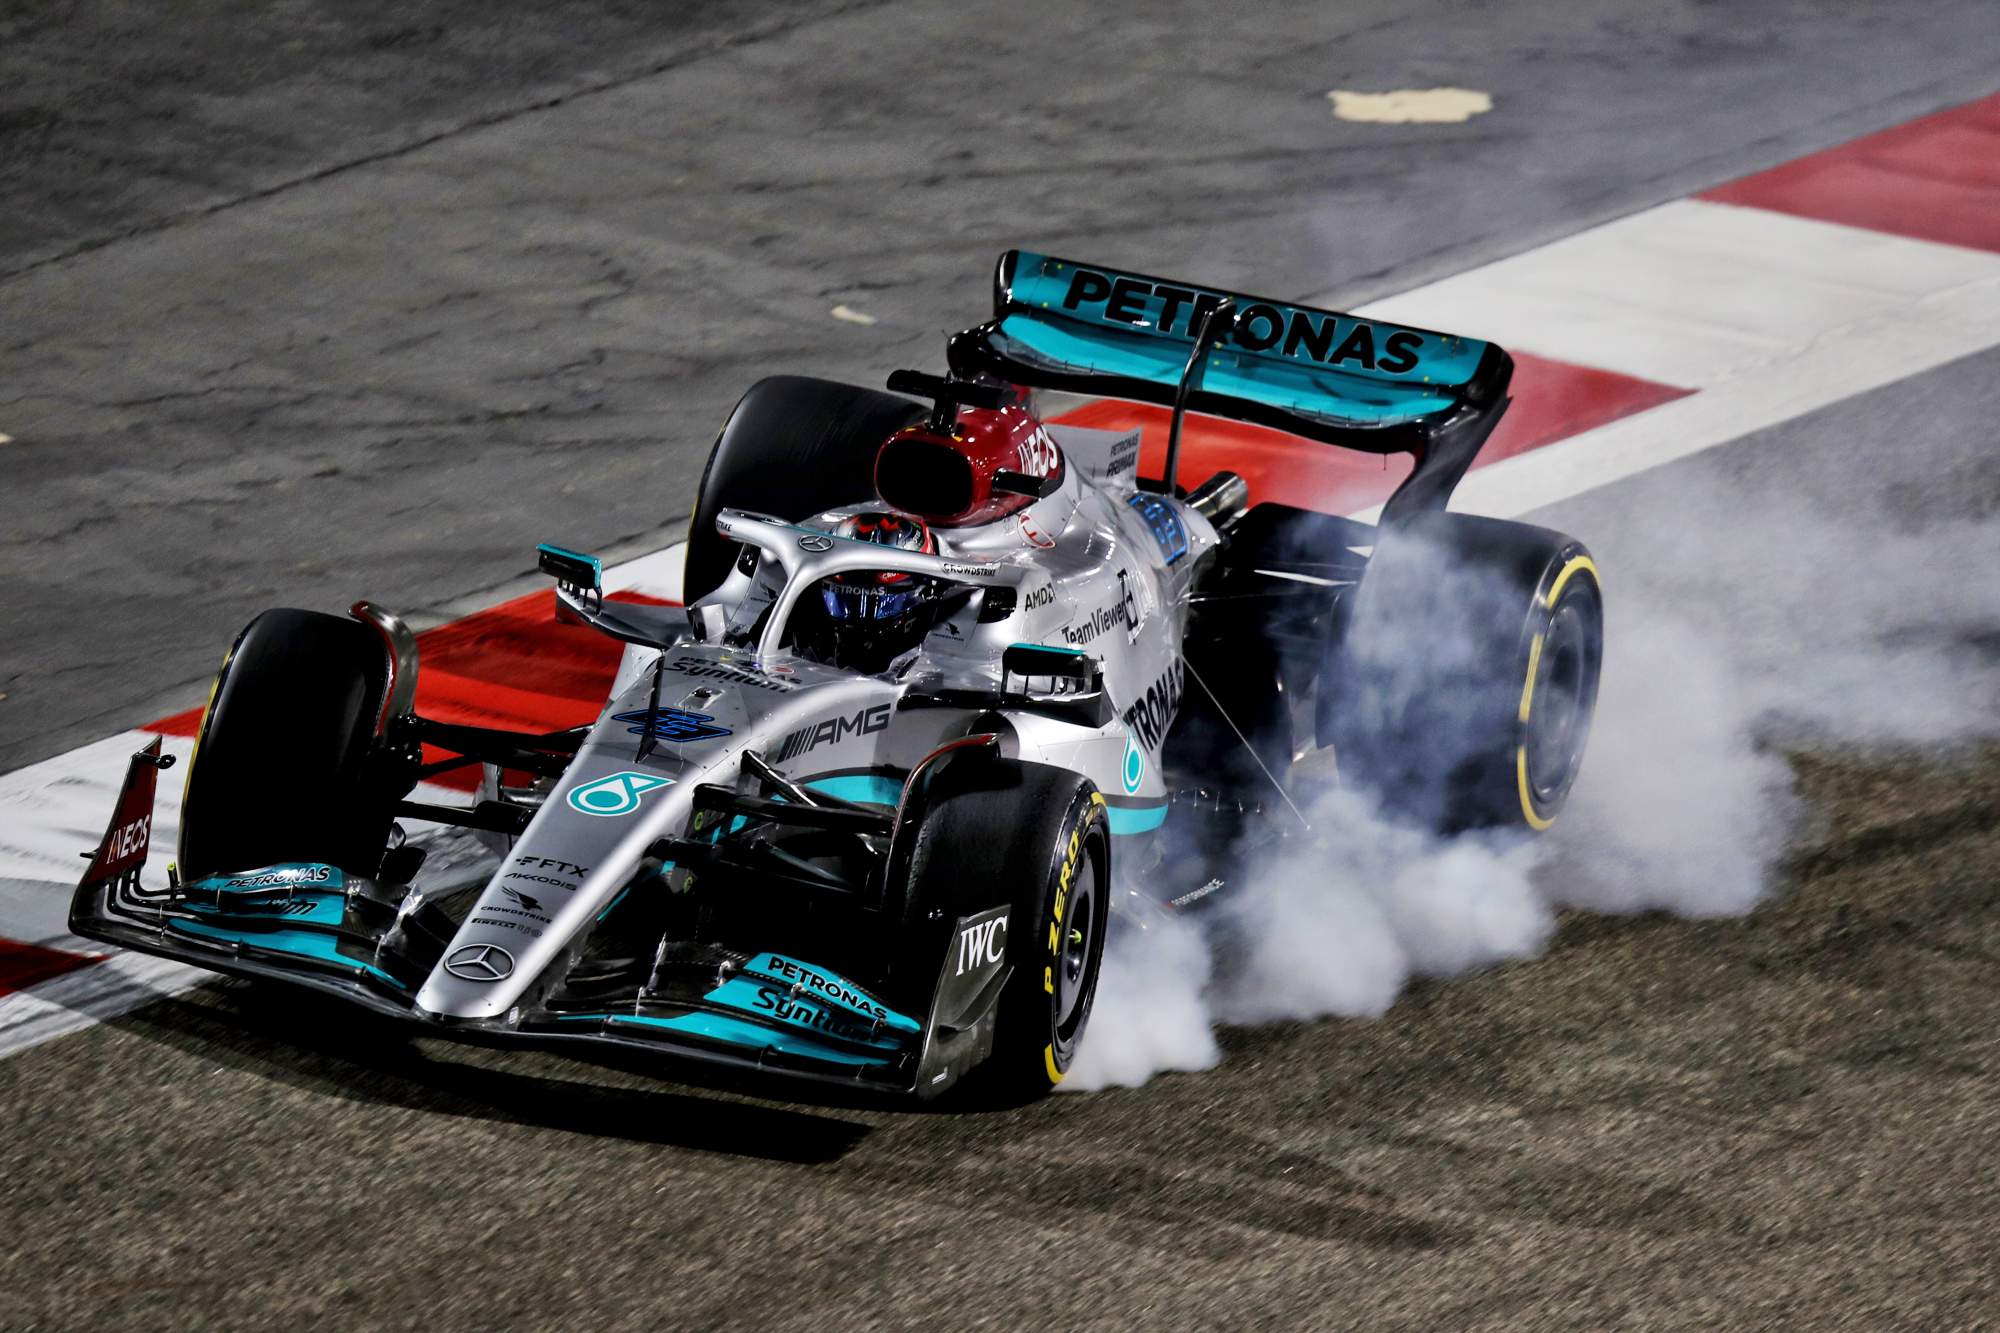 The Bahrain corner bringing out the worst in F1's 2022 cars